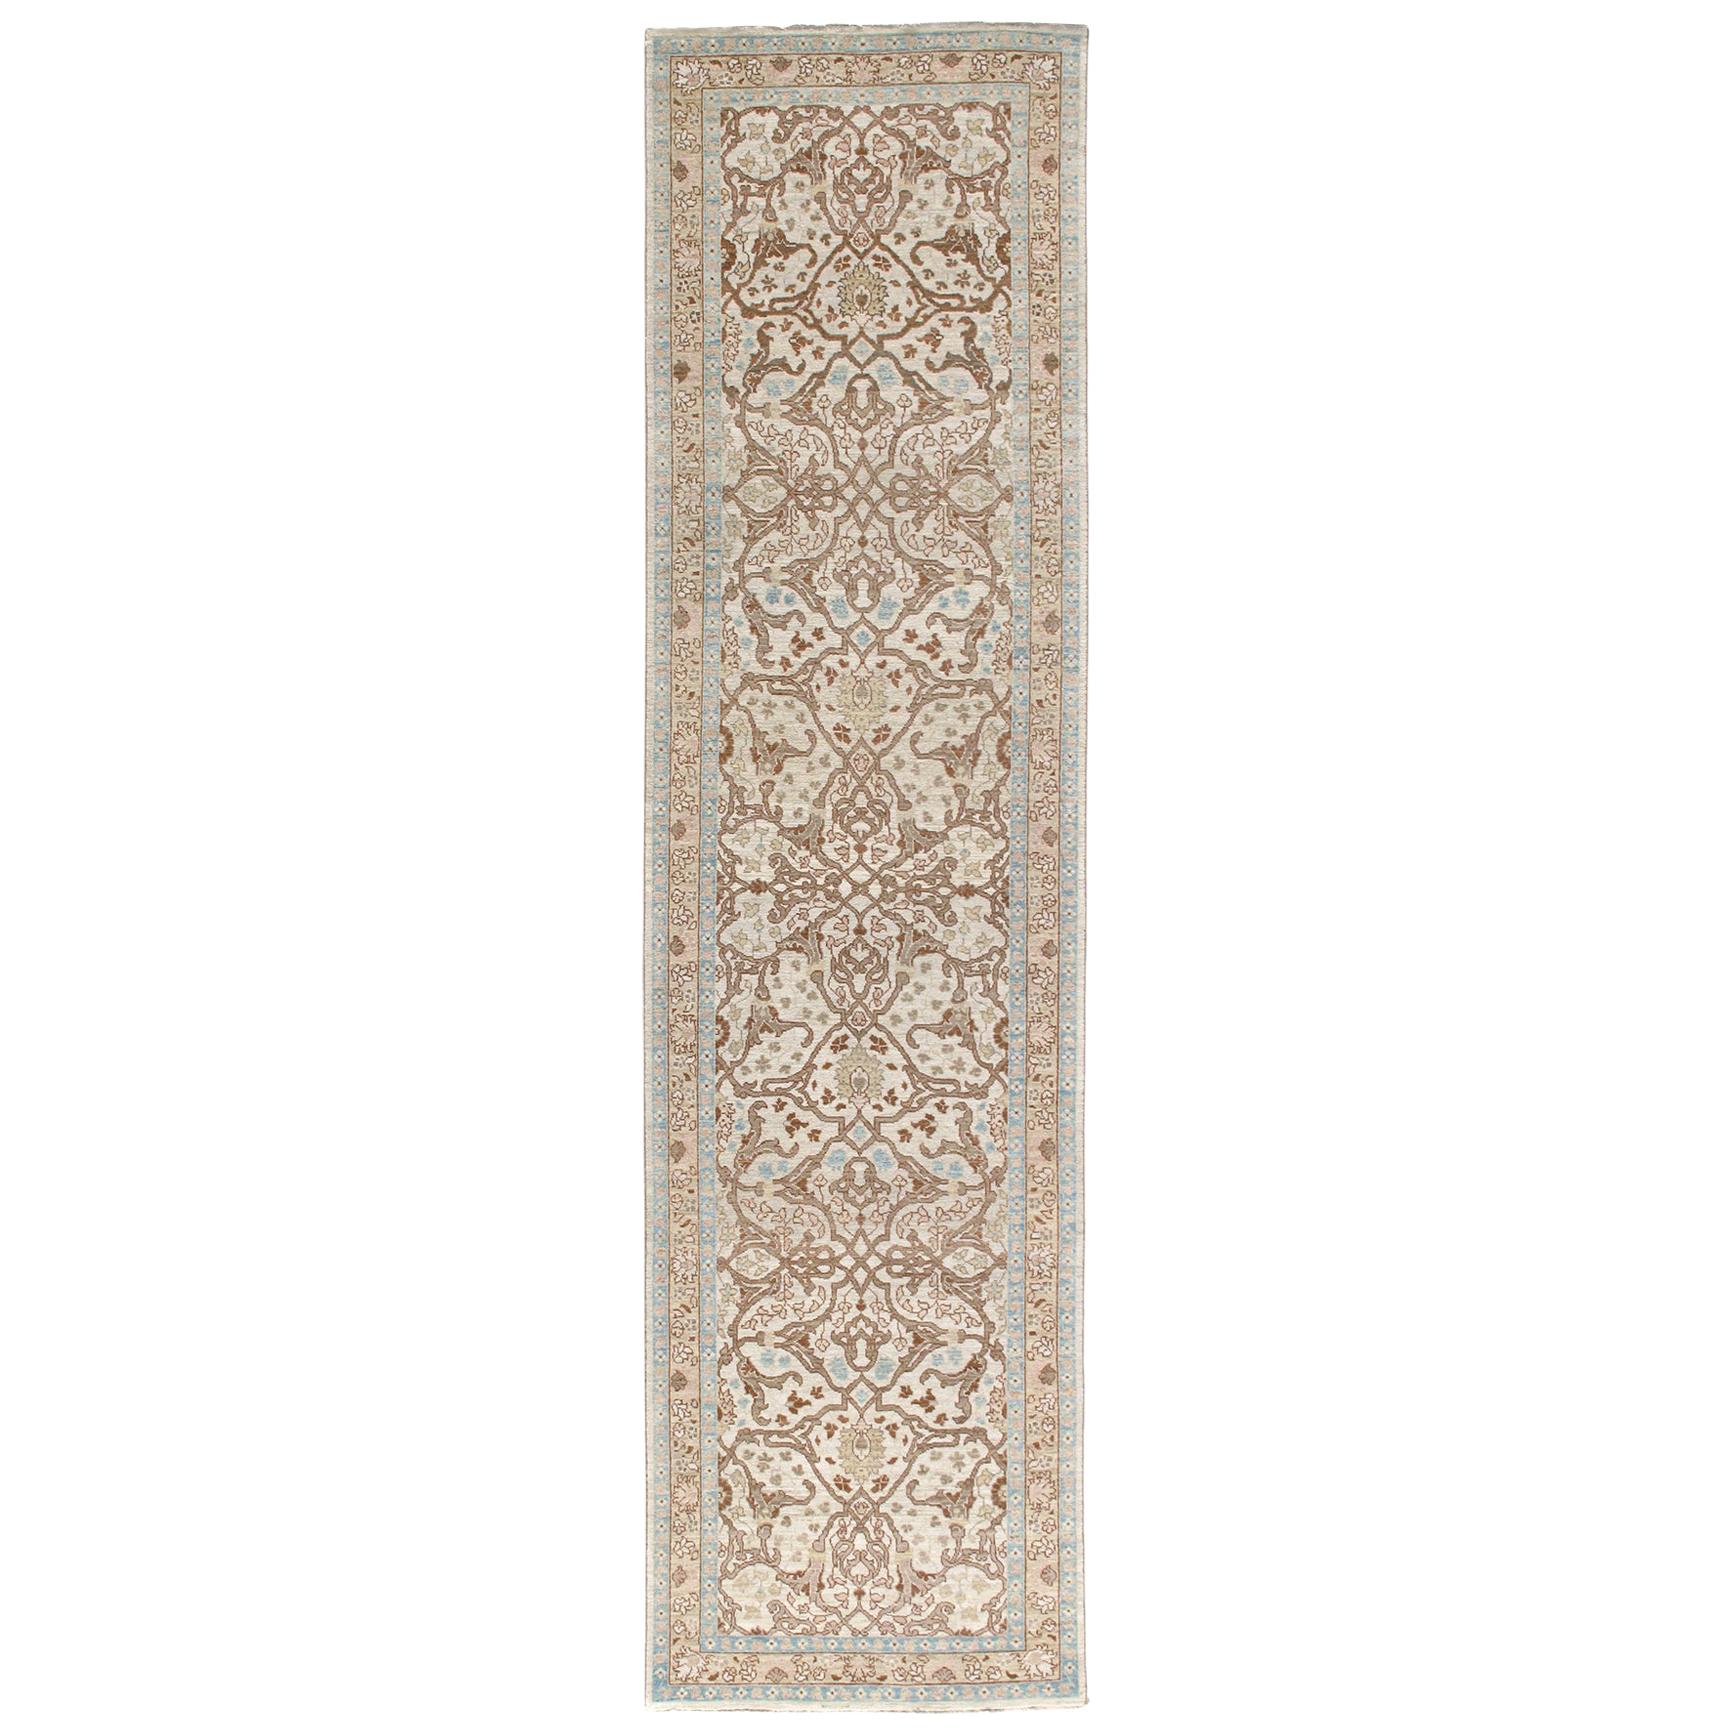 Persian Traditional Tabriz Handknotted Runner Rug in Ivory, Camel and Rust Color